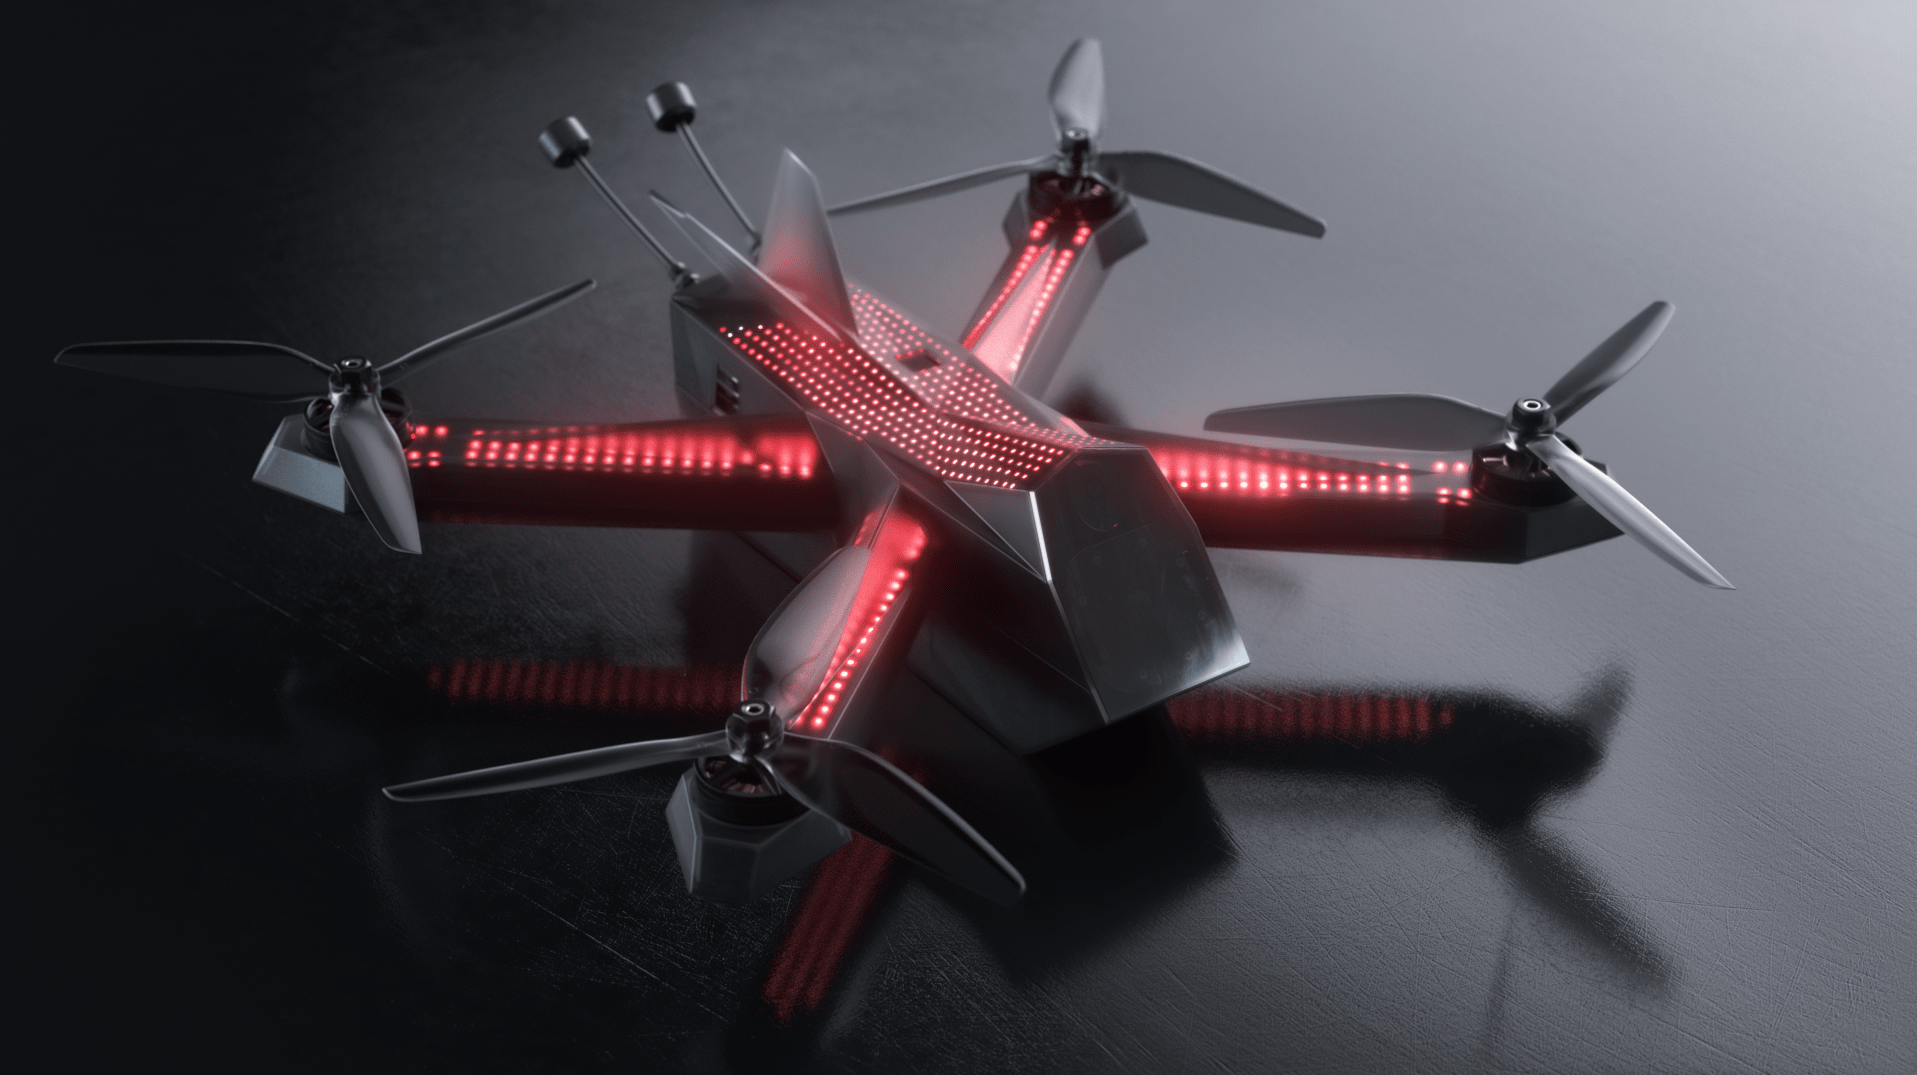 New Racer4 Drone Available For Sale Ahead of 2019 Season - DRONELIFE